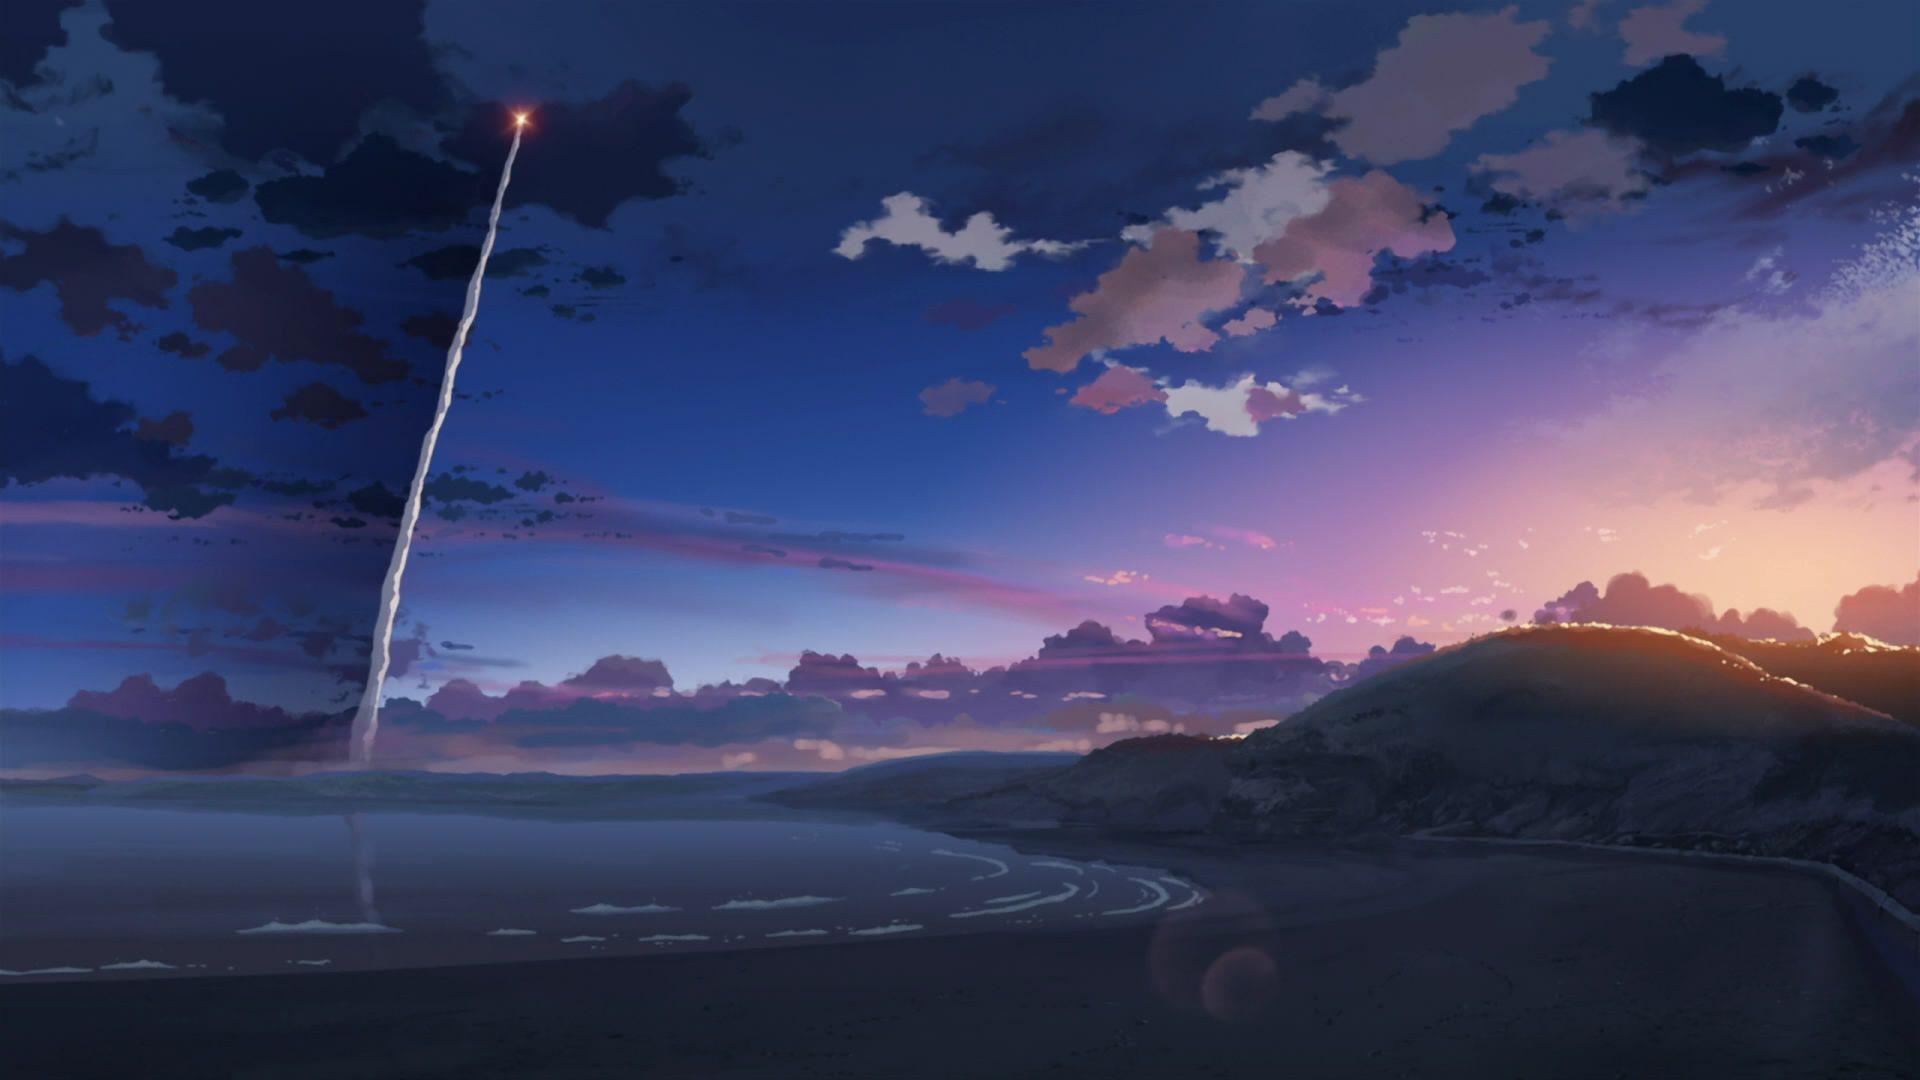 76 5 Centimeters Per Second Wallpapers